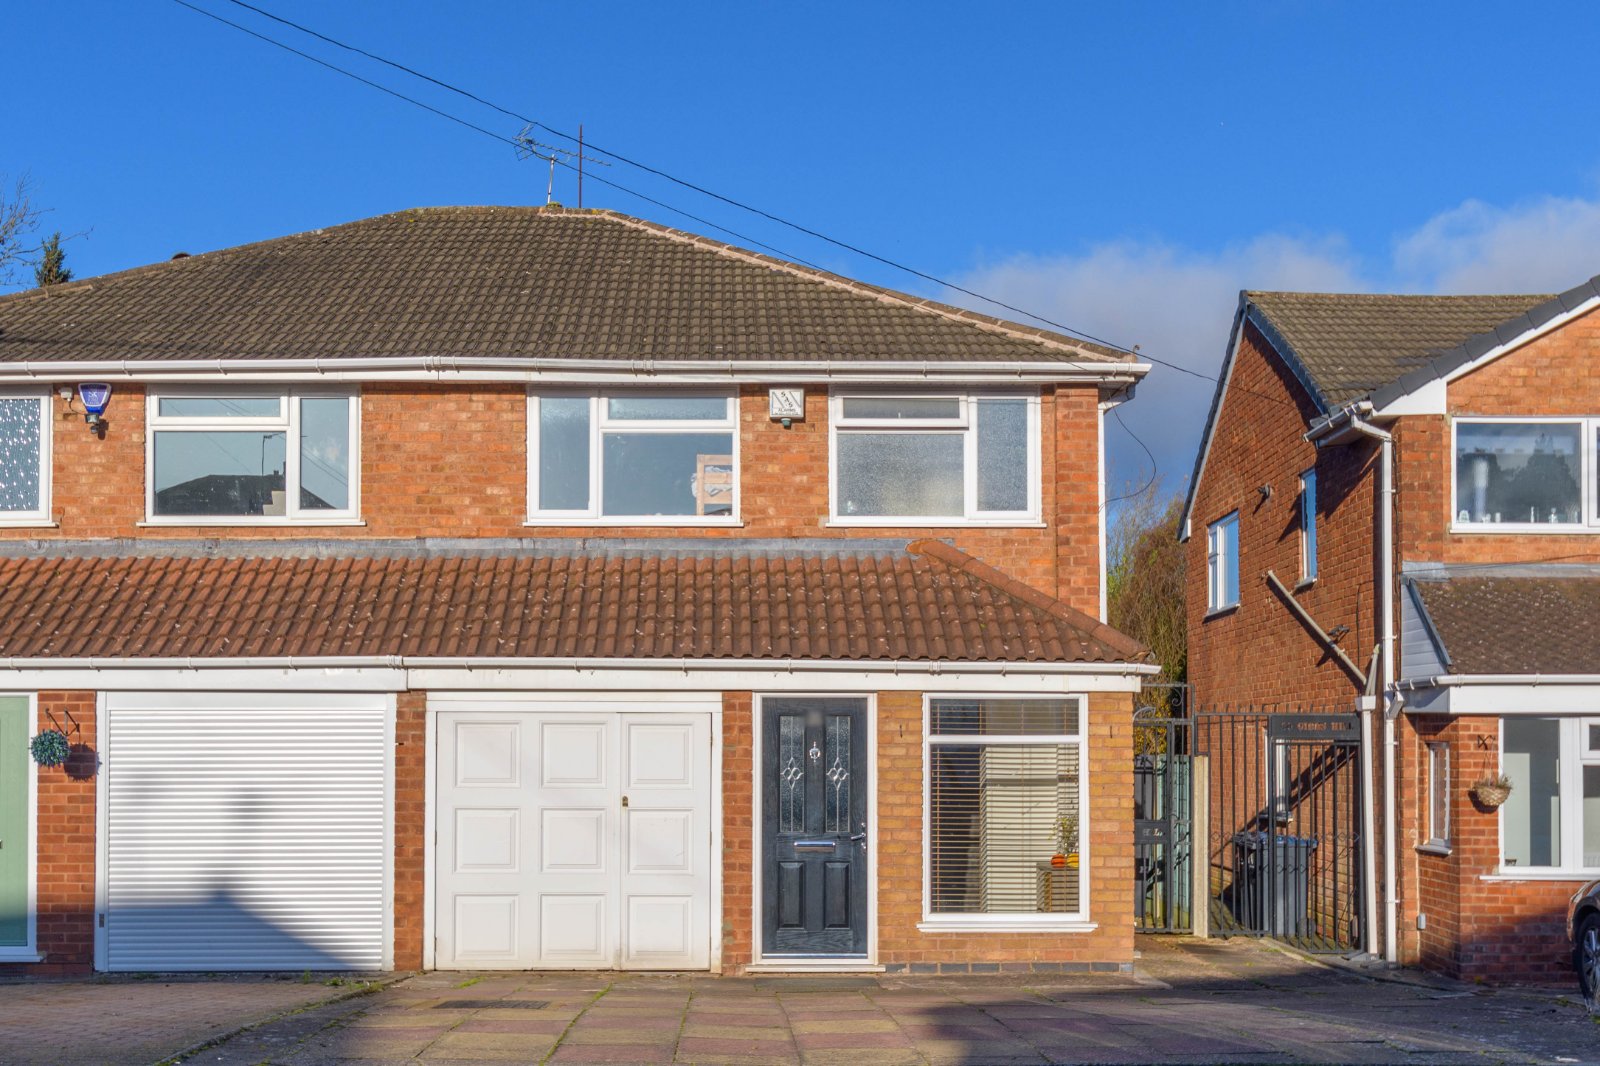 3 bed house for sale in Gibbs Hill Road, Birmingham - Property Image 1